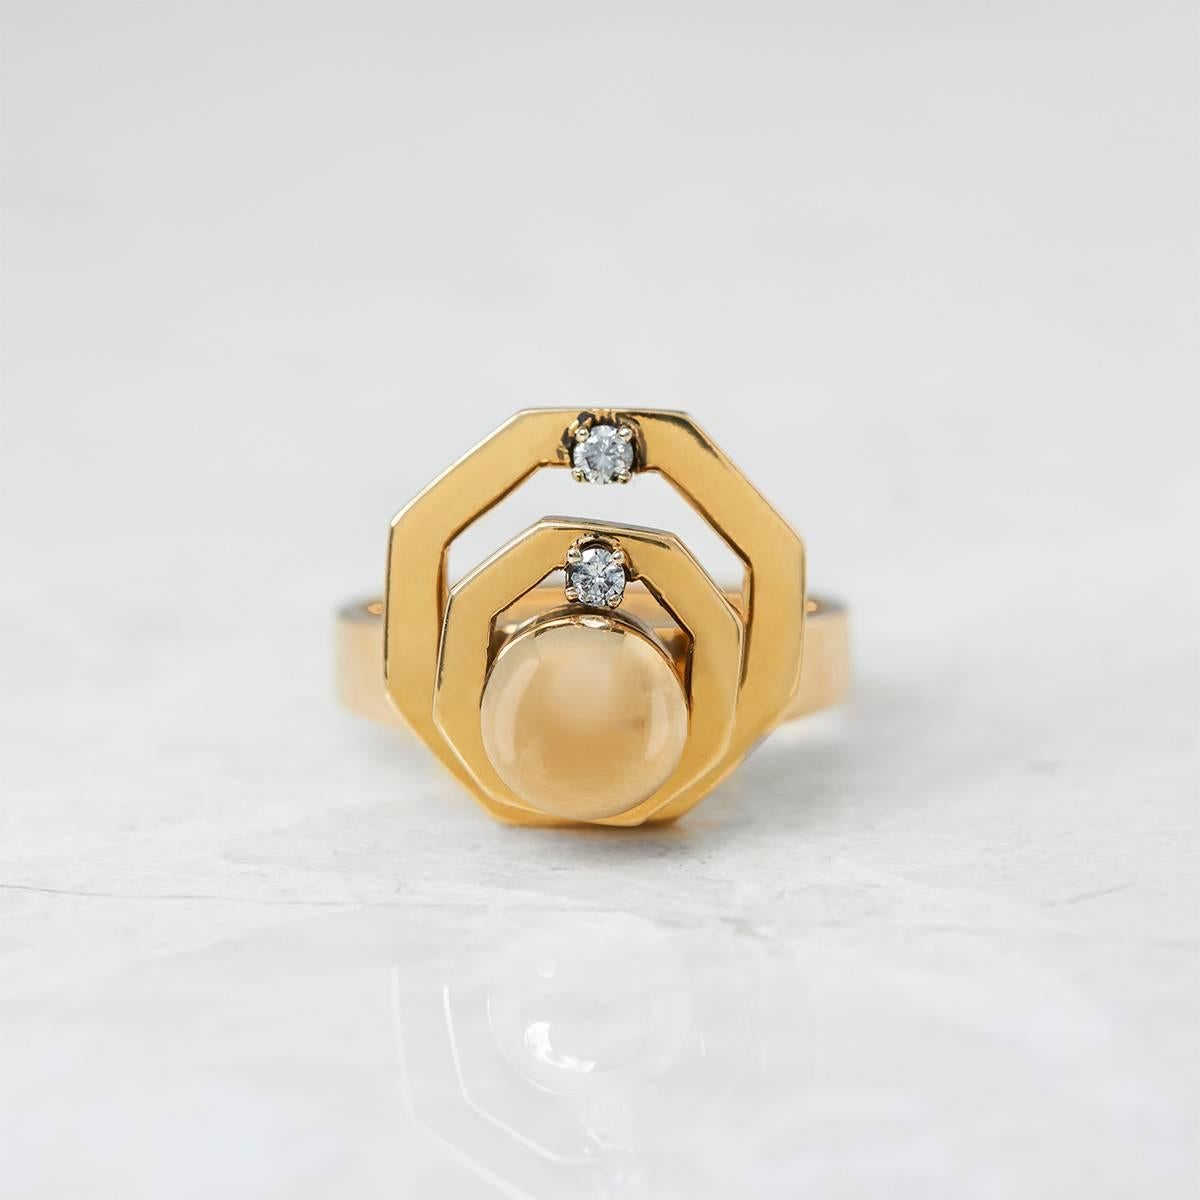 Code: COM095
Description: 14k Yellow Gold 0.20ct Diamond Swivel Ring
Accompanied With: Presentation Box
Gender: Ladies
UK Ring Size: M
EU Ring Size: 52 1/2
US Ring Size: 6
Resizing Possible?: YES
Condition: 8
Material: Yellow Gold
Total Weight: 6.22g